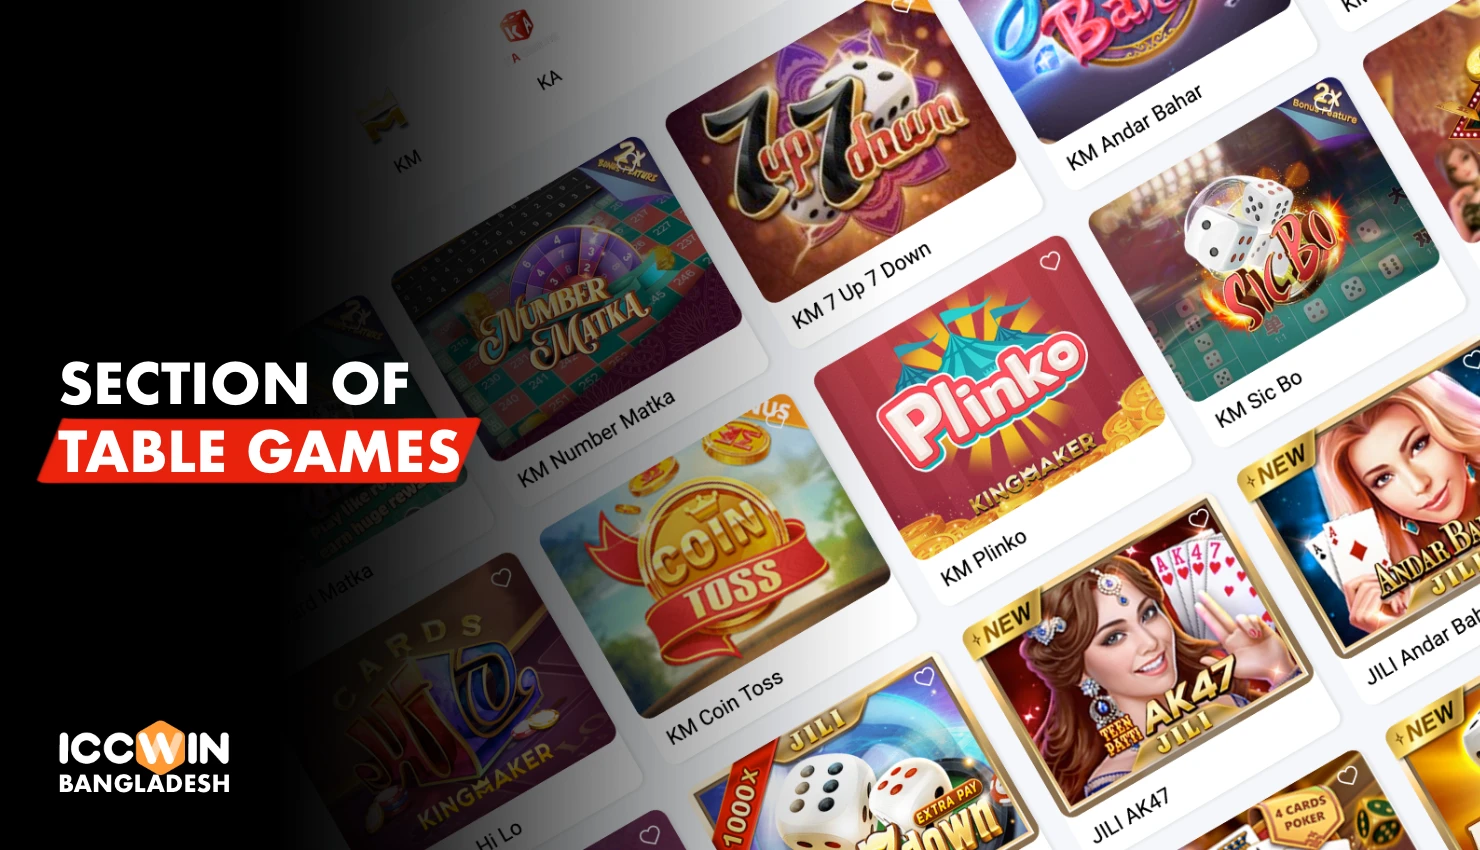 Dozens of popular table games are available to players from Bangladesh at Iccwin